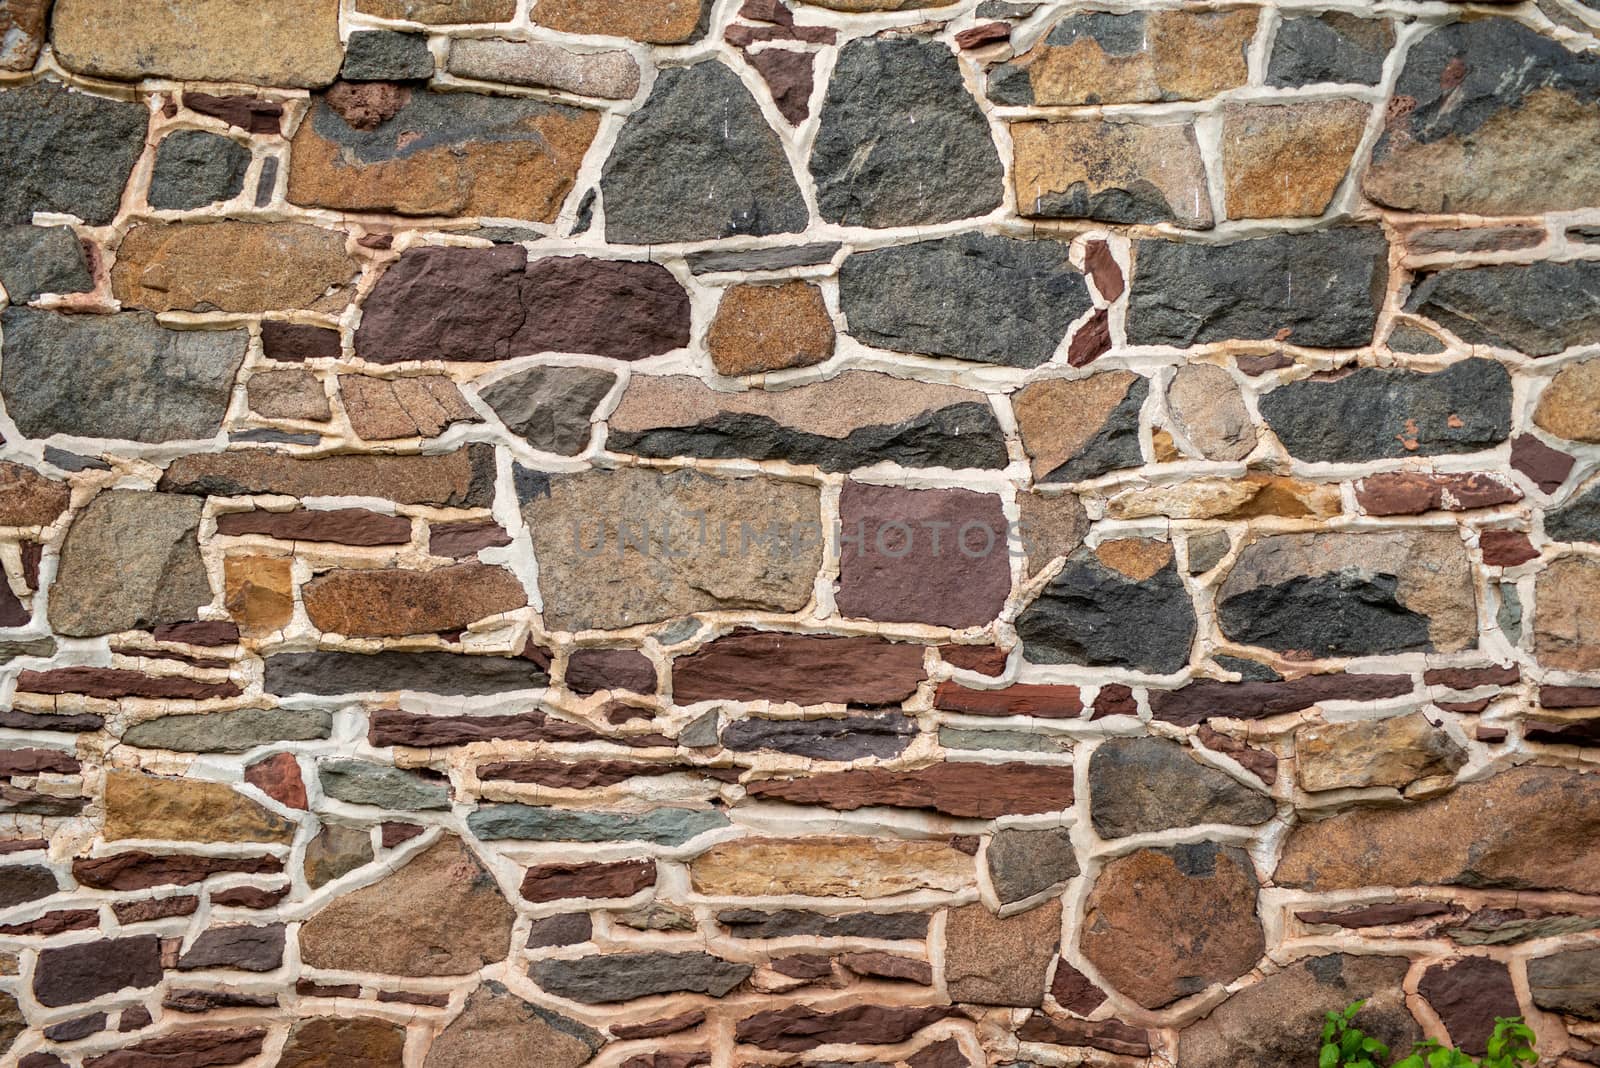 An exterior wall from a colonial home at the Daniel Boone Homestead in Pennsylvania. Gorgeous colors and texture.